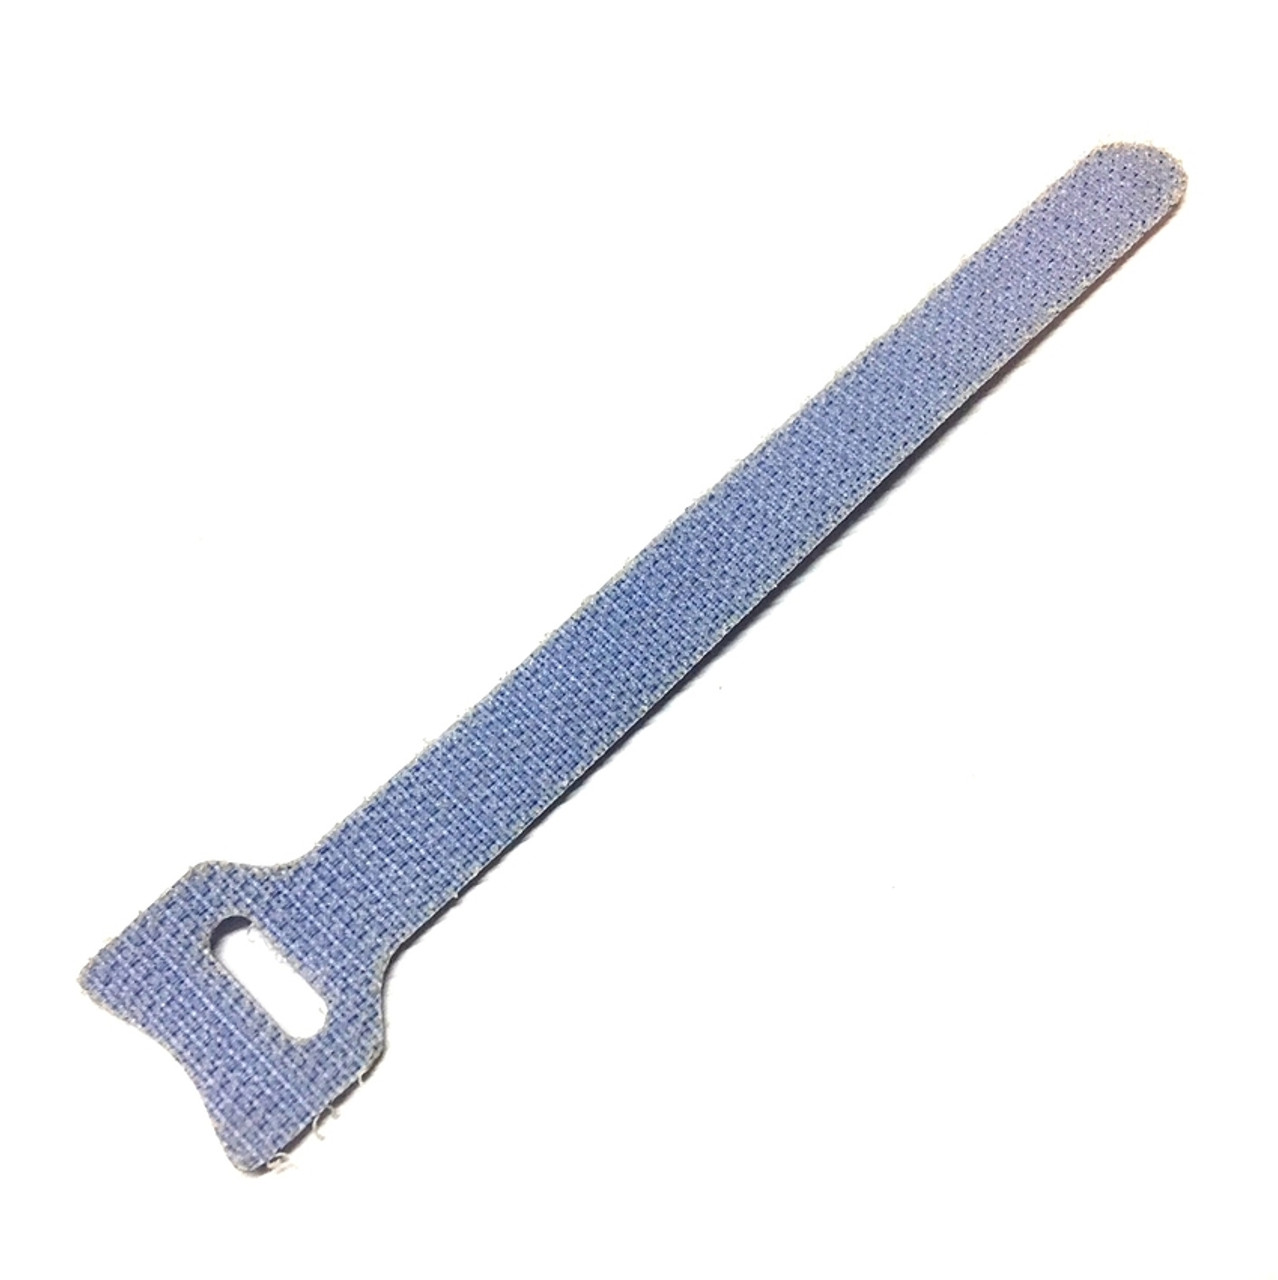 Twisted Hobbys Velcro Strap tool